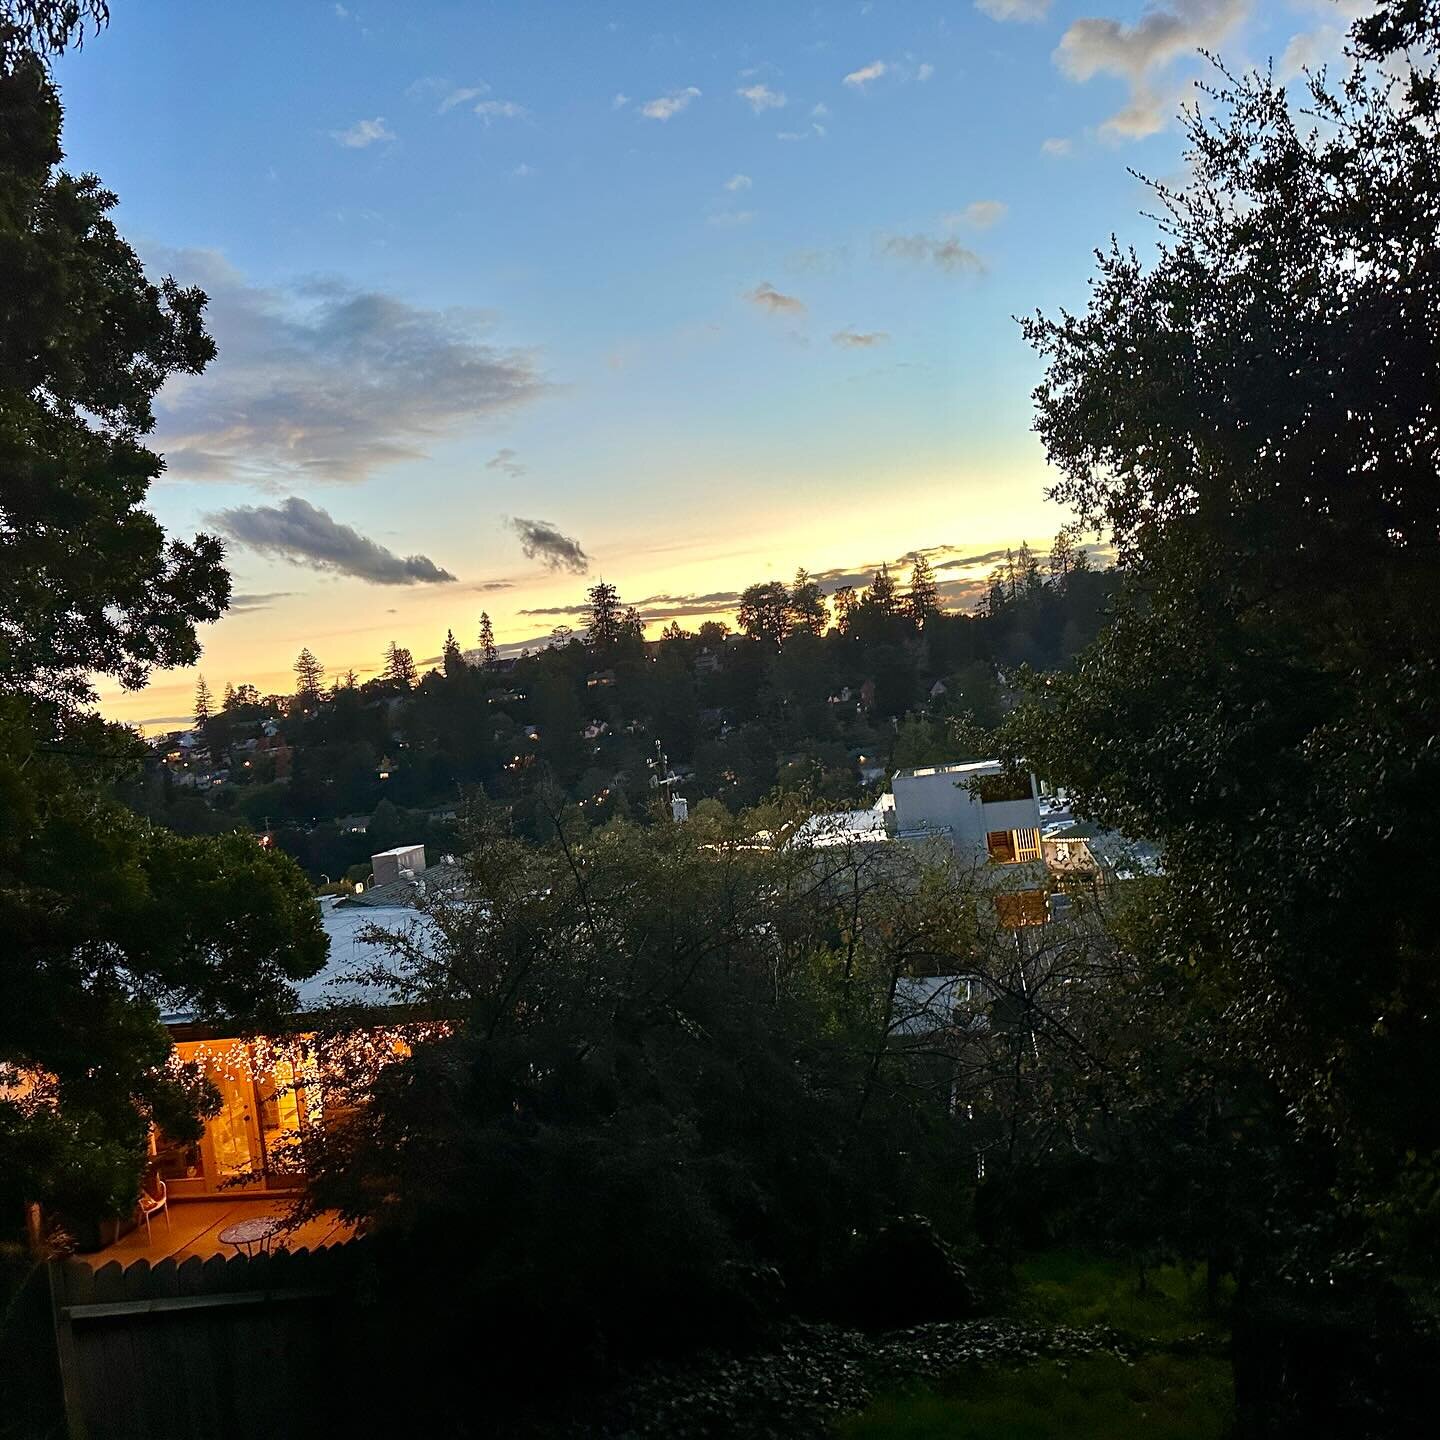 A beautiful night for a walk above The Village! It&rsquo;s such a gift to have a trail just steps from our studios. #montclairvillage #walkingandpilates #montclairrailroadtrail